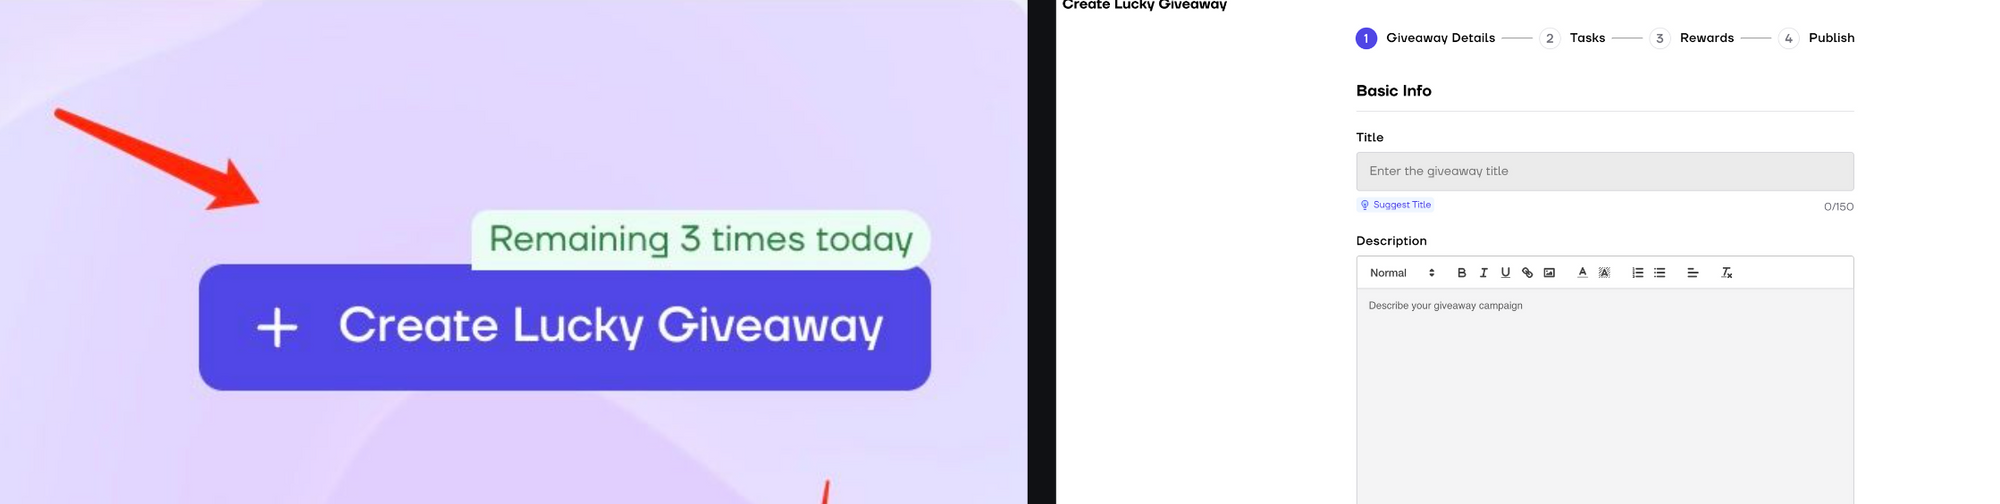 Create Lucky Giveaway Mode